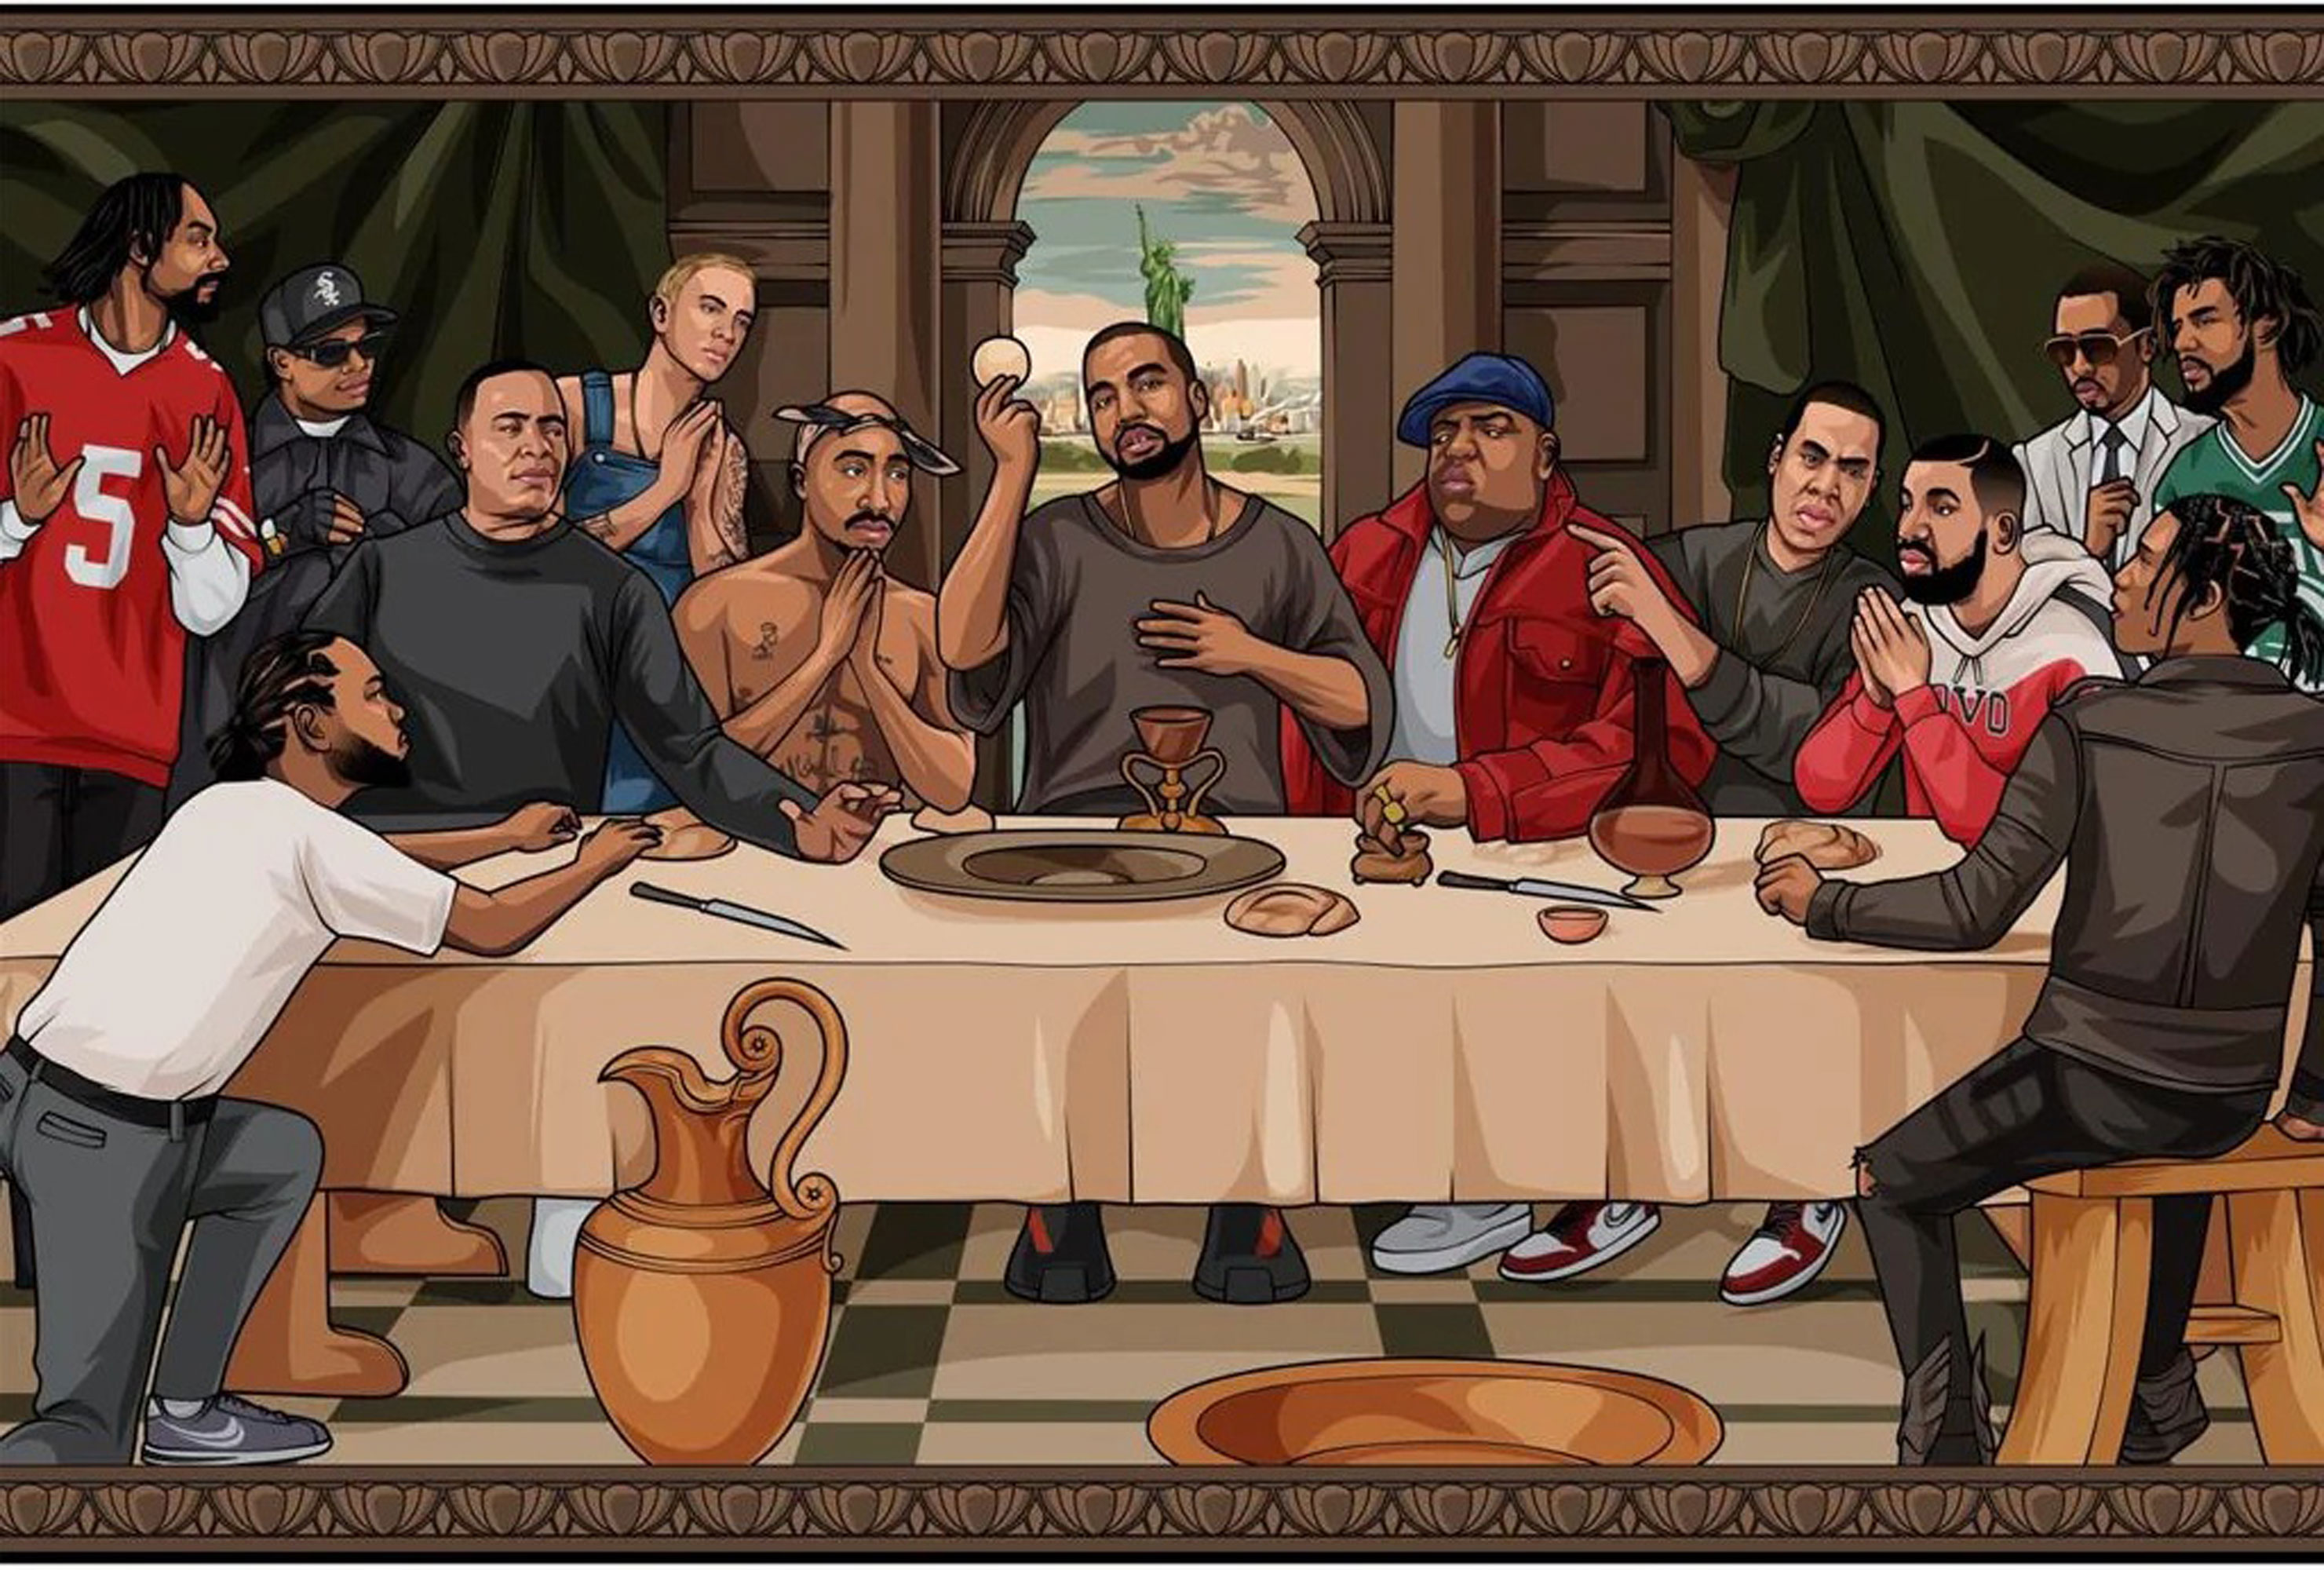 Last Supper, The - of Hip Hop